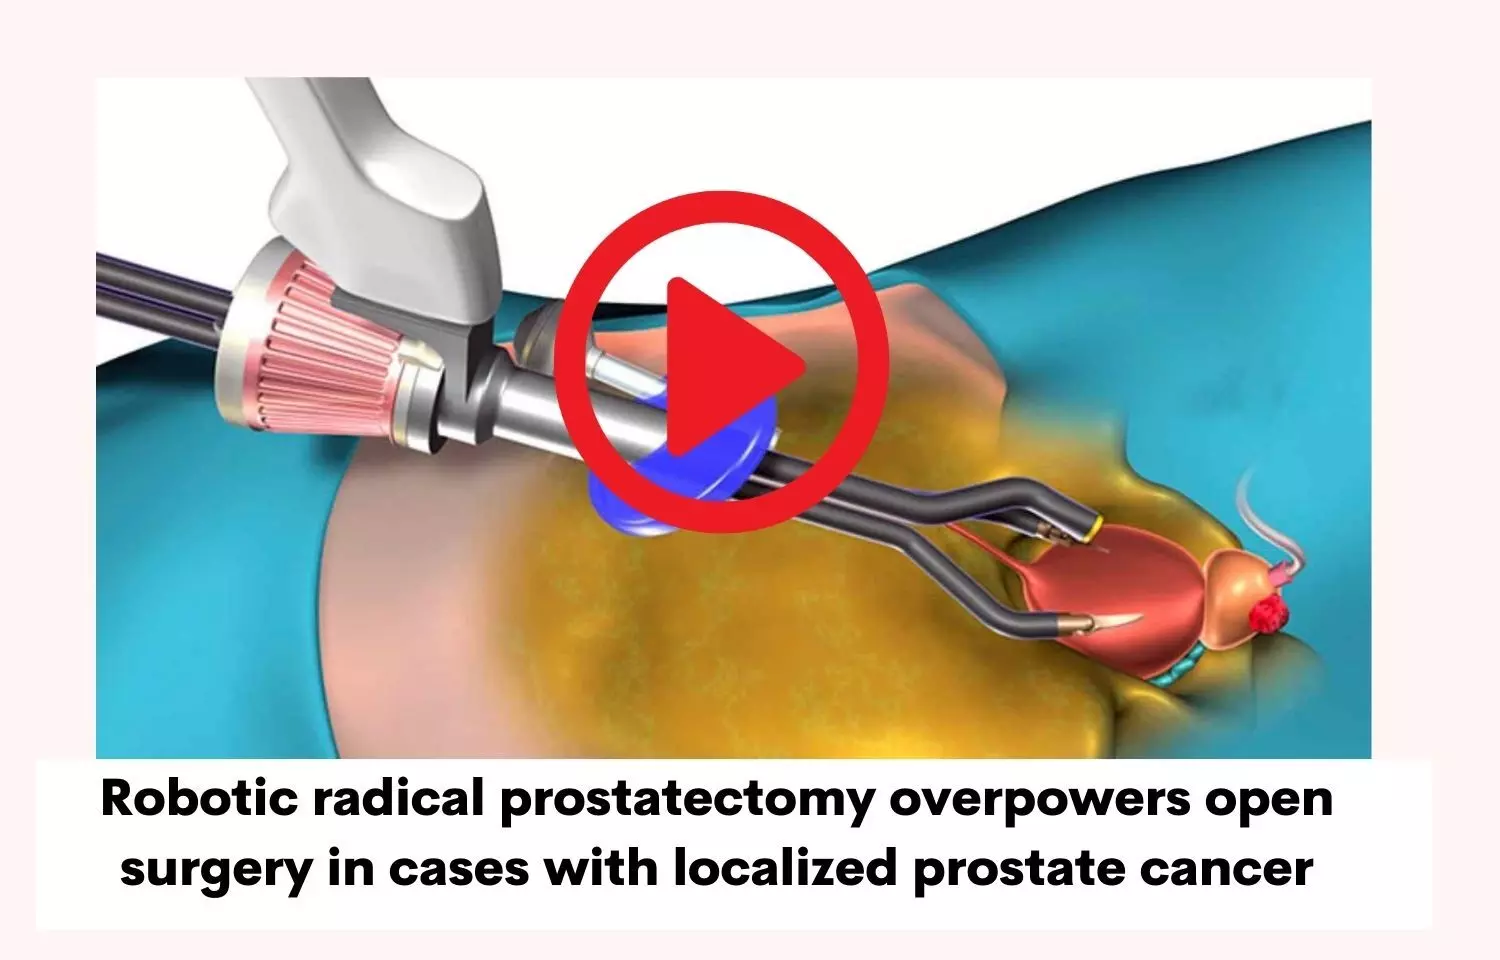 Robotic radical prostatectomy overpowers open surgery in cases with localized prostate cancer